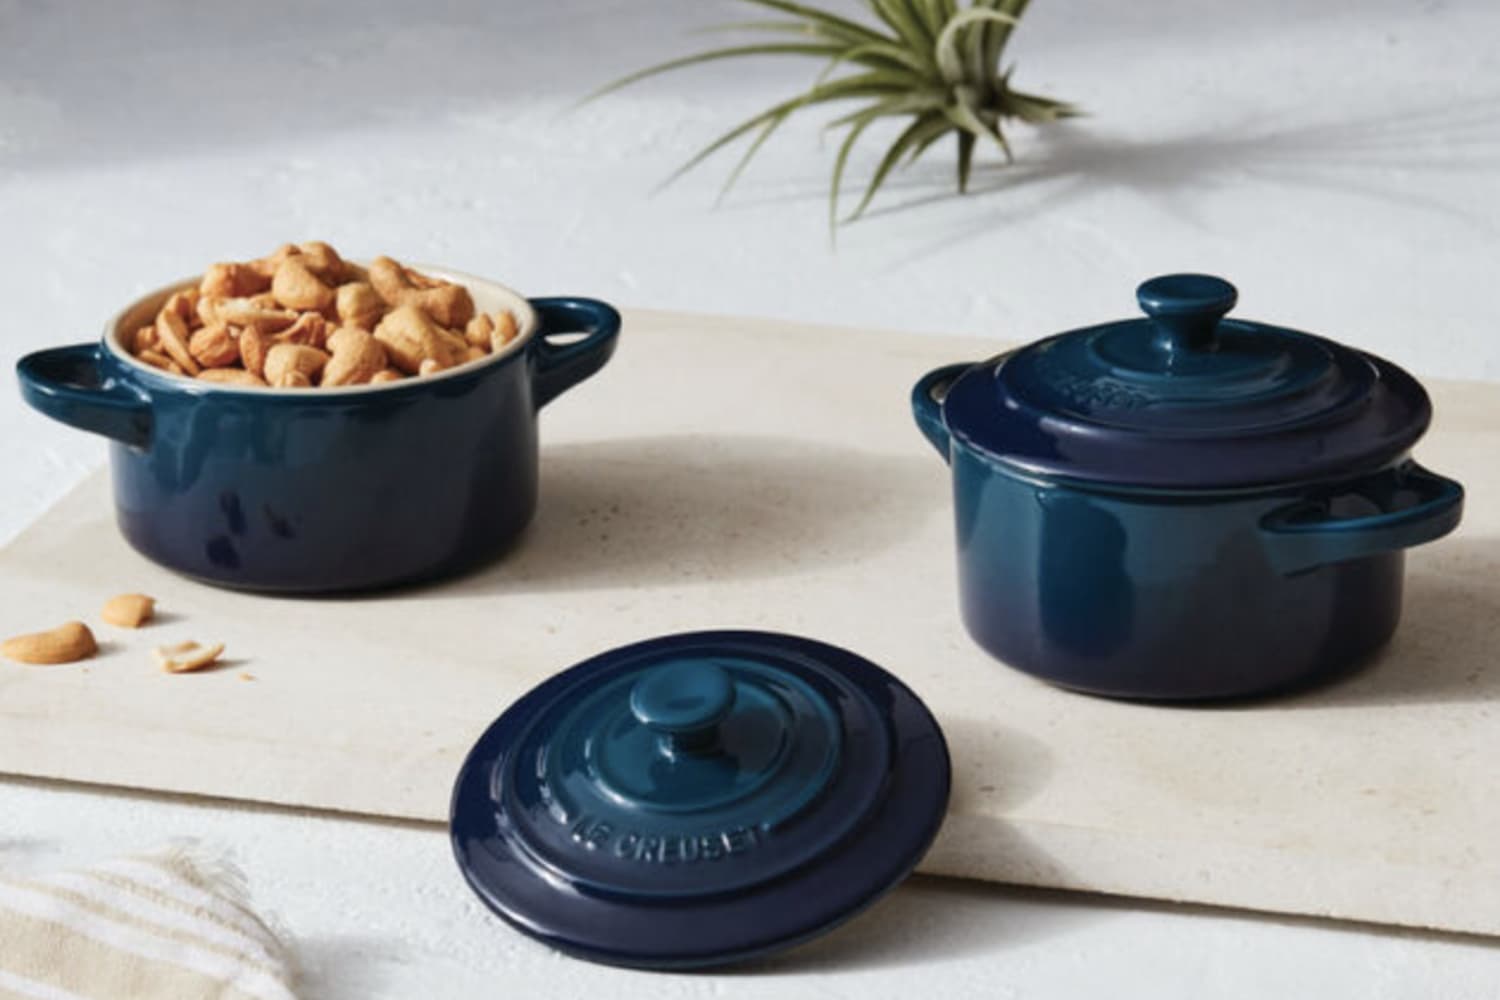 Le Creuset Cookware Is as Little as $22 at  Prime Big Deal Days